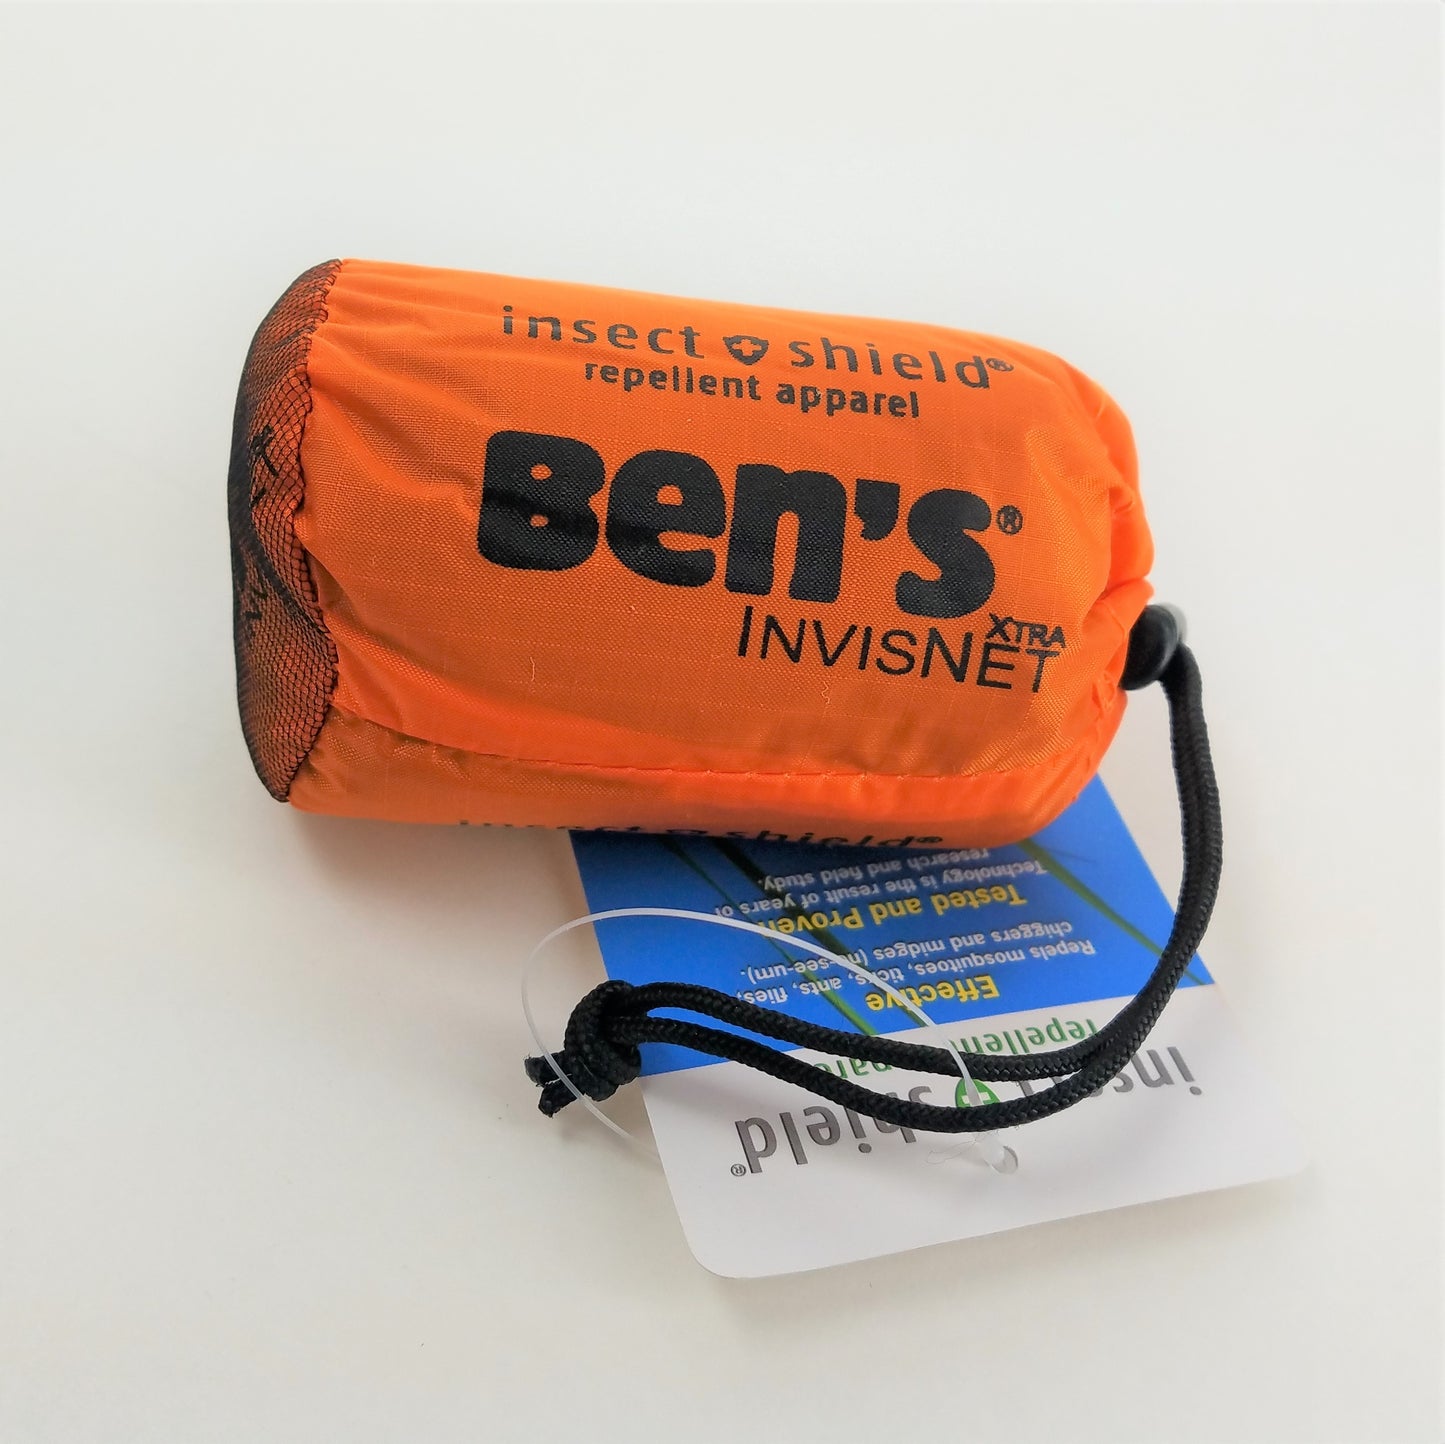 Bens invisinet Xtra  with insect shield shown in duffel